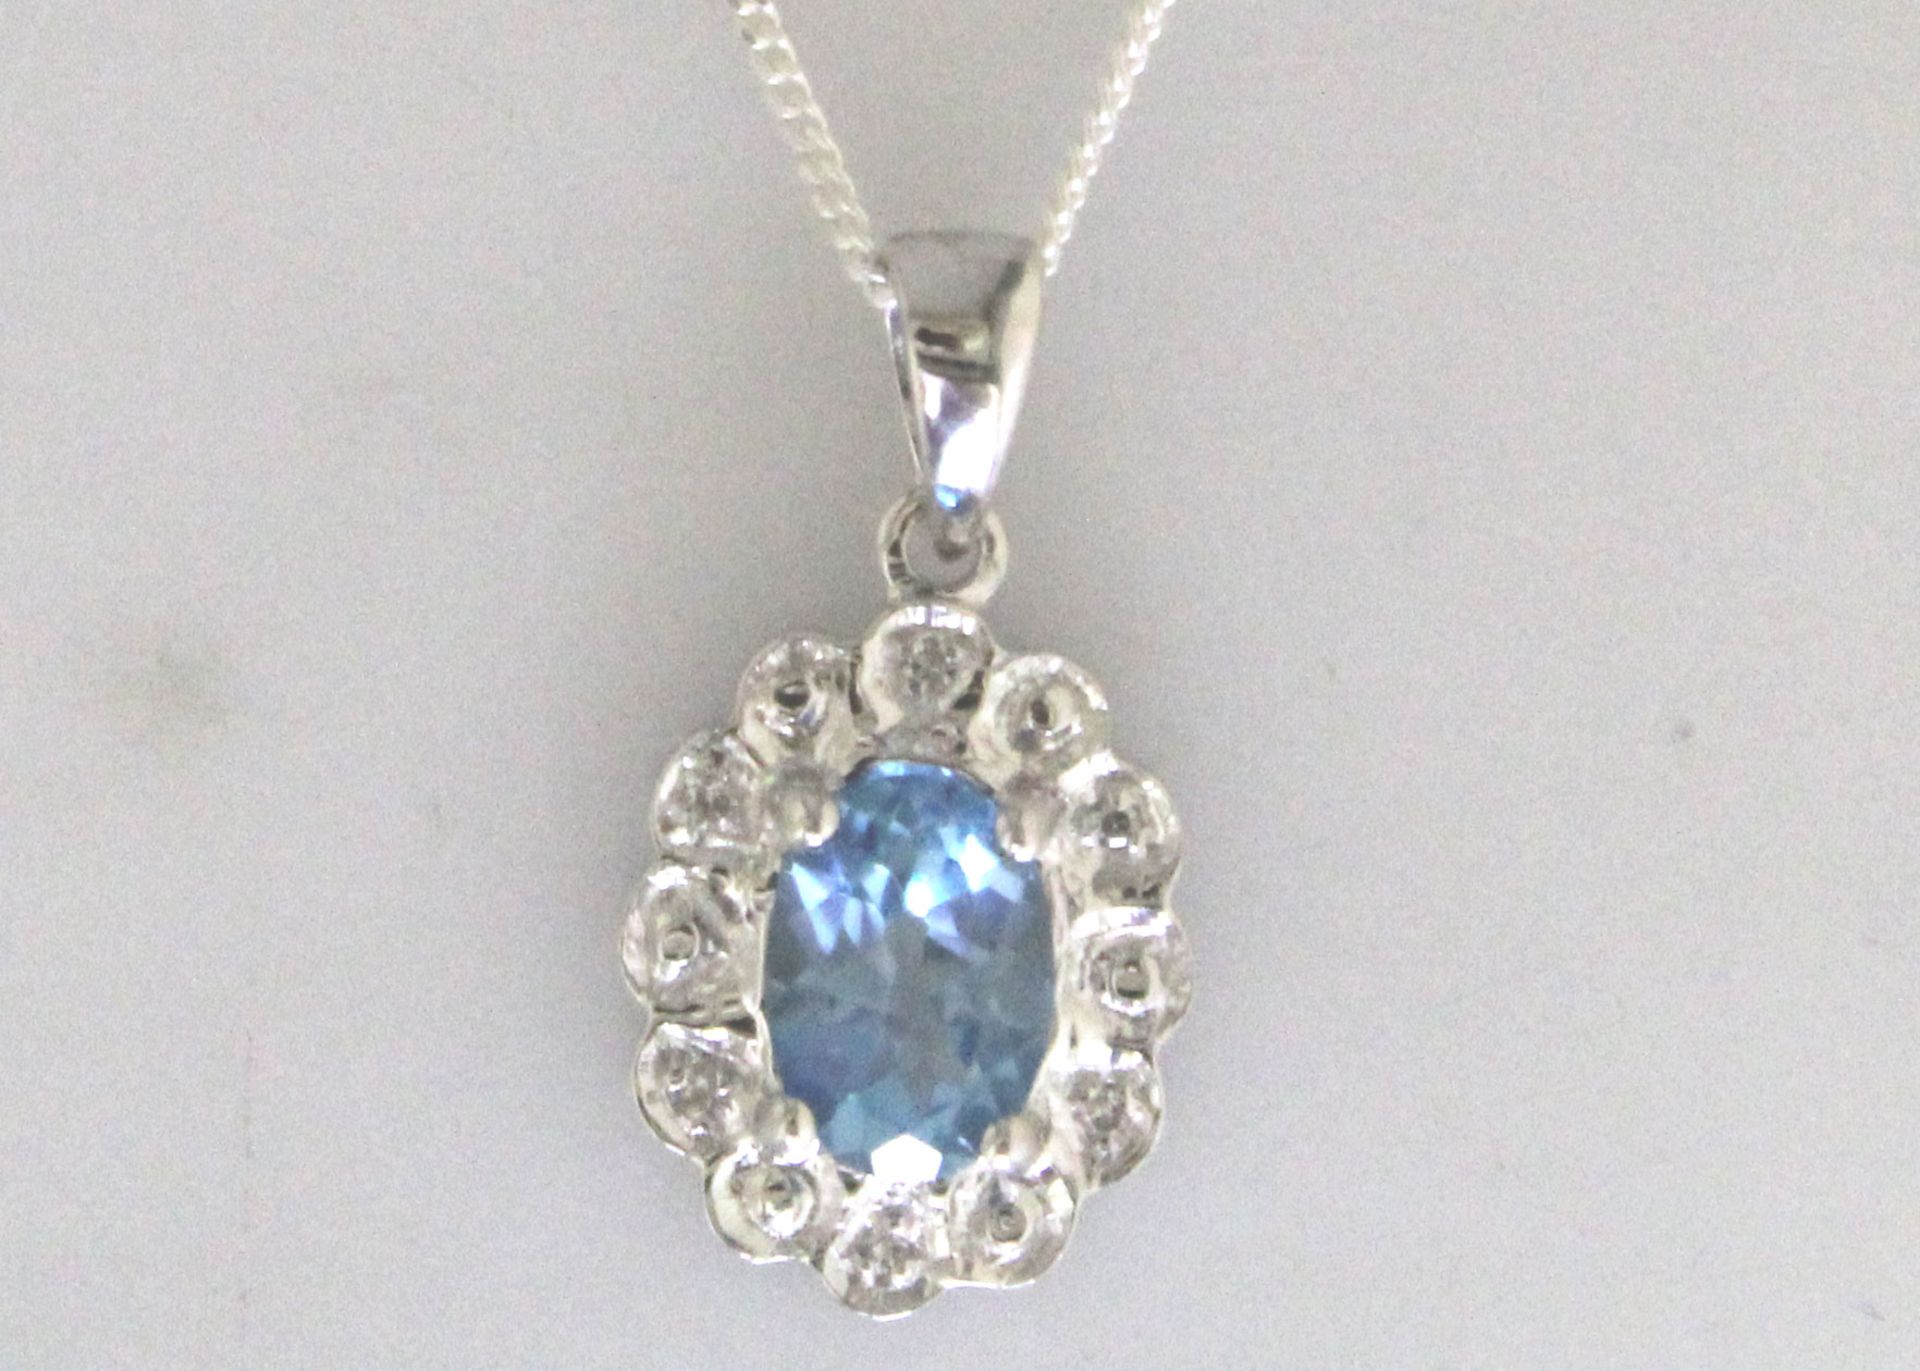 9ct White Gold Fancy Cluster Diamond Blue Topaz Pendant (BT0.86) 0.02 Carats - Valued By AGI £950.00 - Image 5 of 6